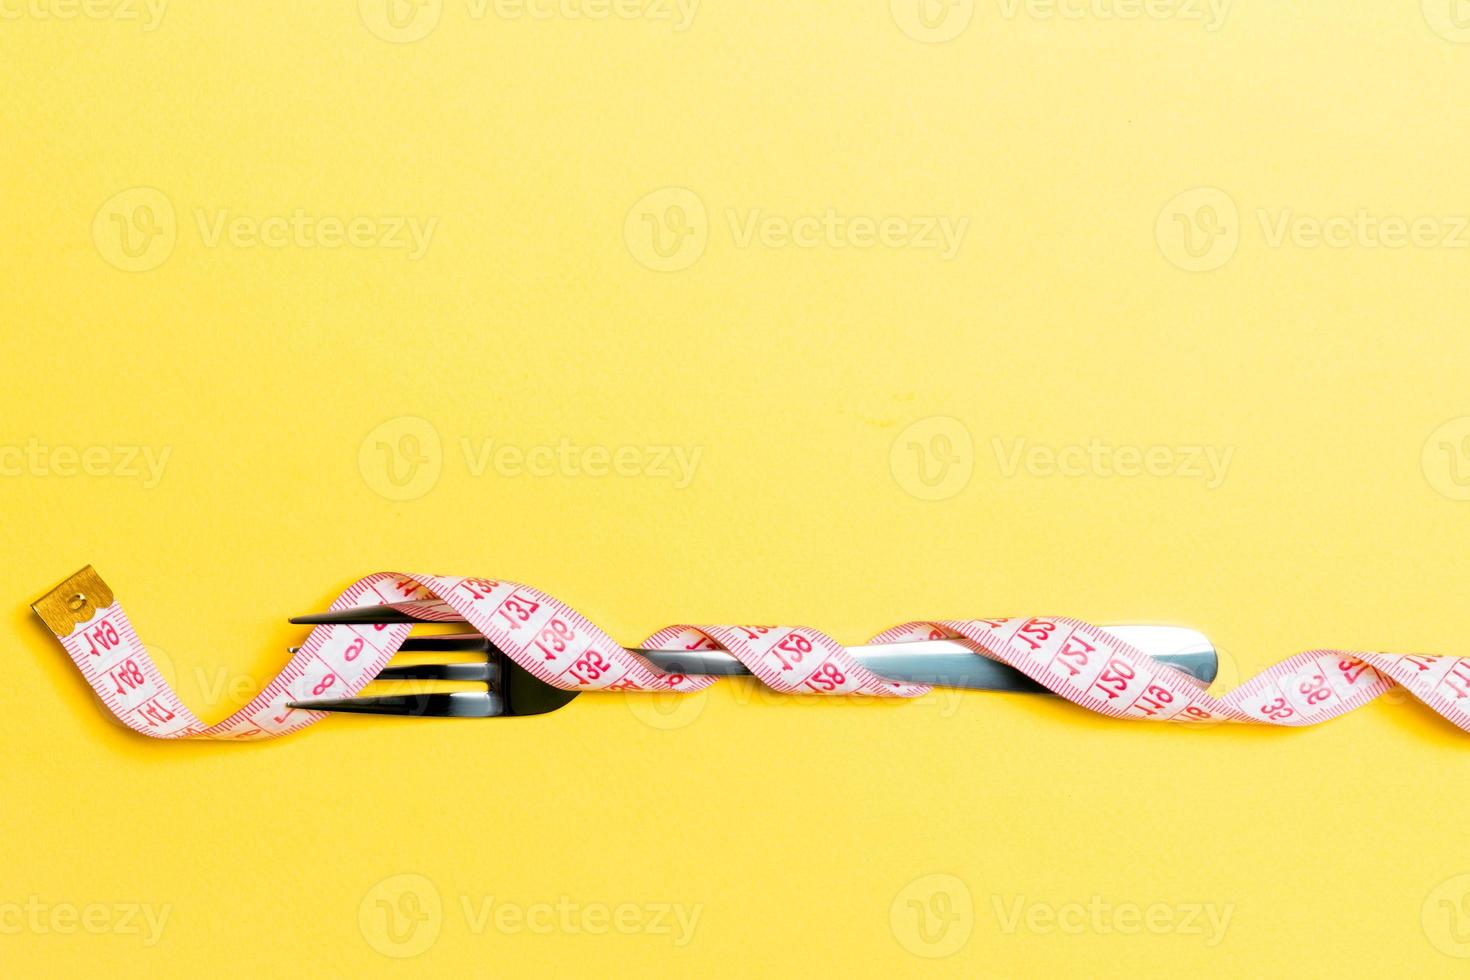 Composition of curled wrapped measuring tape and fork on yellow background. Overweight concept photo